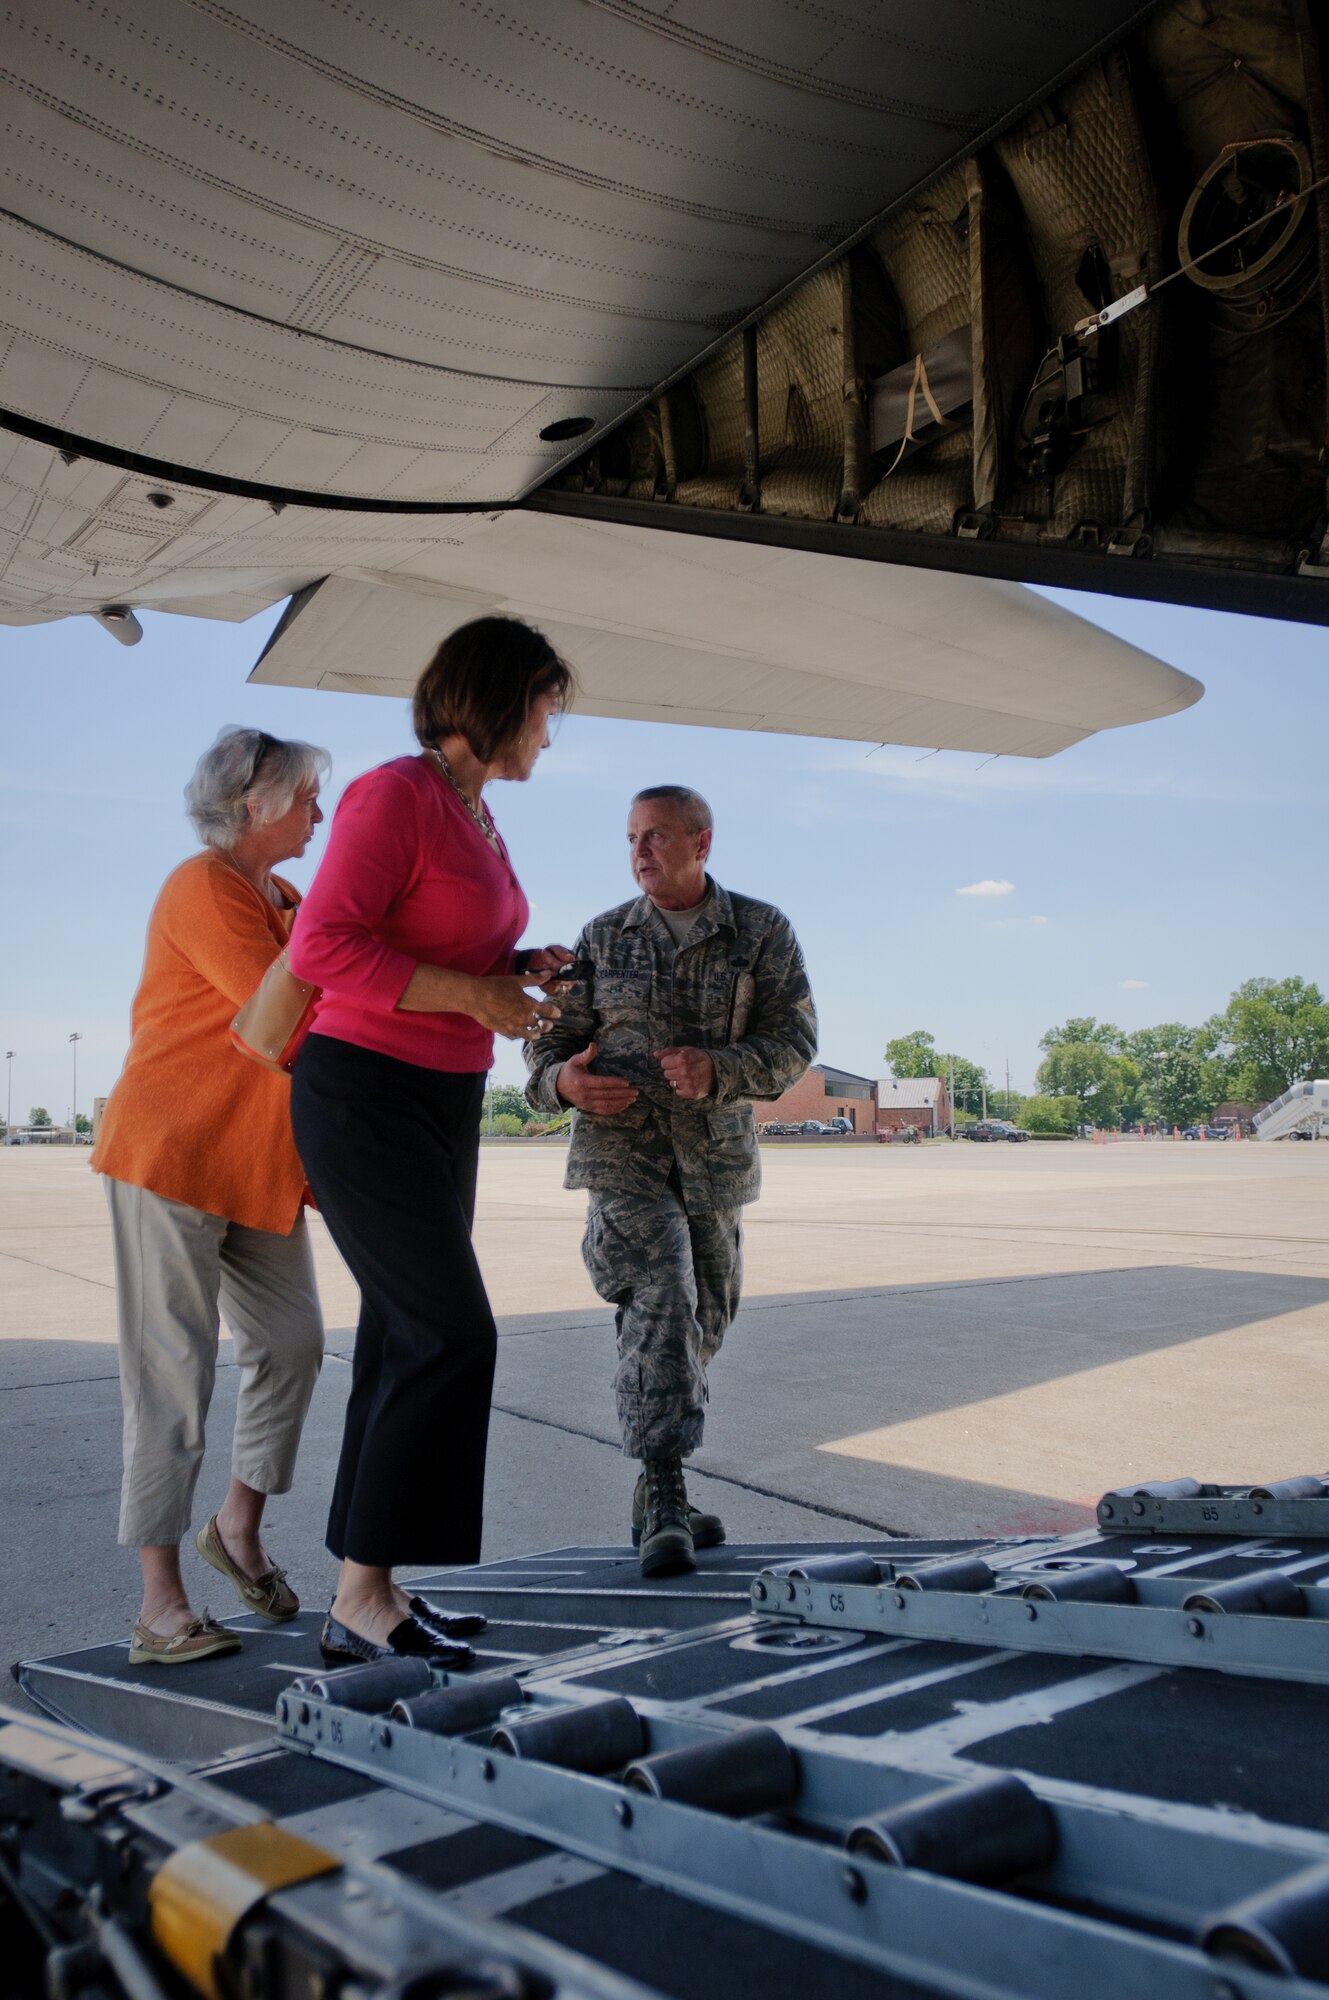 Command Chief Master Sgt. Curtis Carpenter, 123rd Airlift Wing Command Chief, speaks to Mary Moseley (left), President and Owner of Al J. Schneider Co., and Rita Reedy, Corporate Marketing Director for Al J. Schneider Co, while boarding a Kentucky Air National Guard C-130 at Scott Air Force Base on June 8. The employers were invited by the ESGR as part of a bosslift, where employers learn the importance of the U.S. Air Force mission being conducted by their traditional Guardsman employees. (U.S. Air Force photo by Master Sgt. Phil Speck)